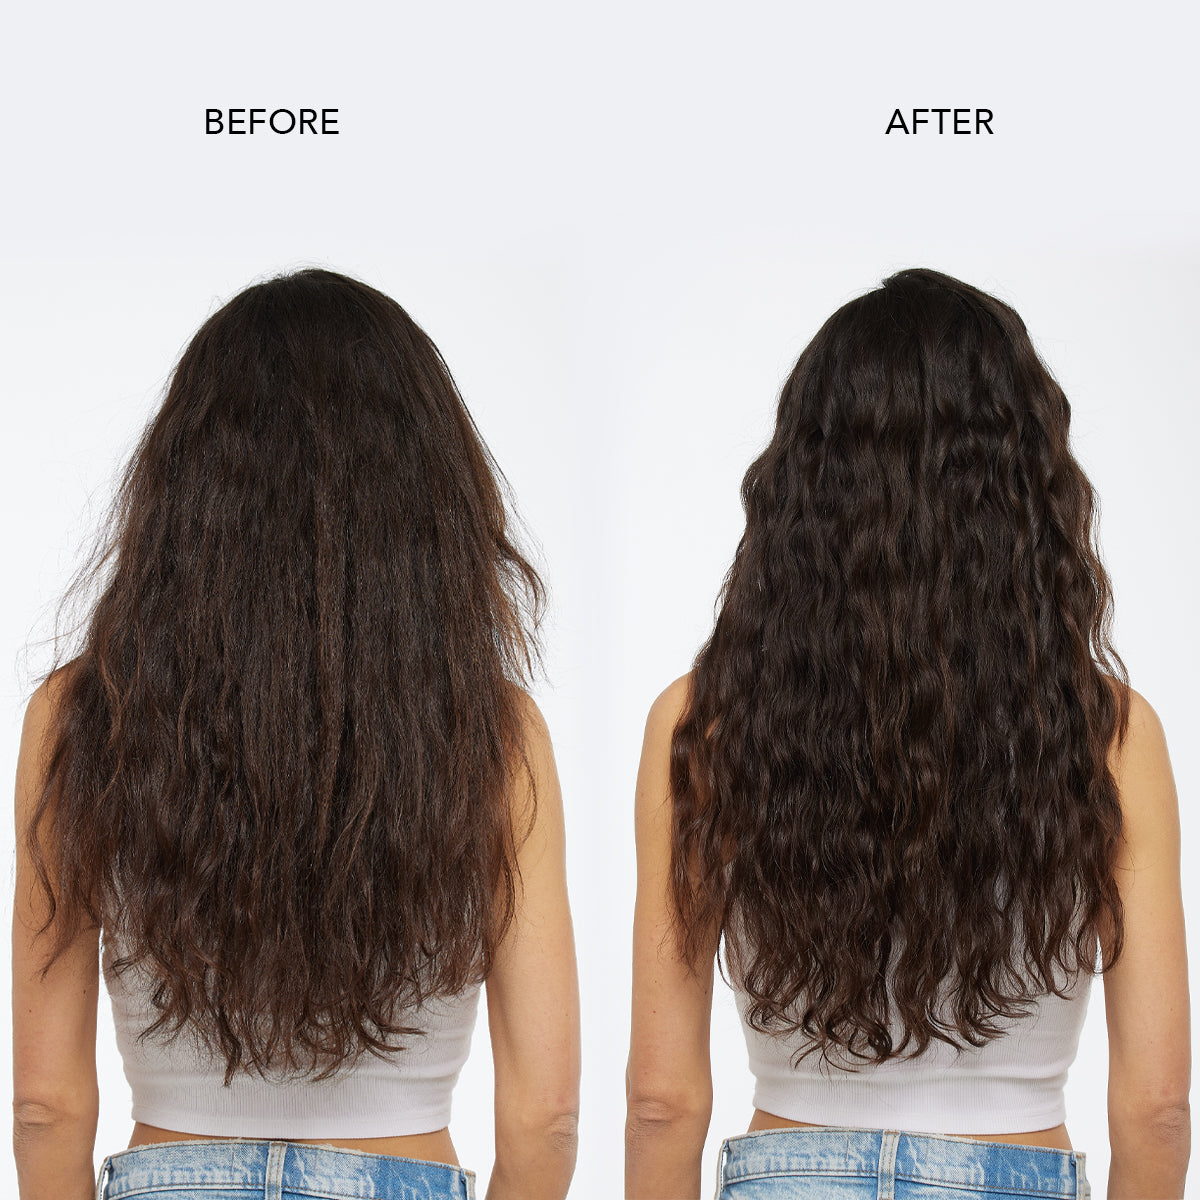 CLEARSTEM REPAIR non-comedogenic conditioner before and after